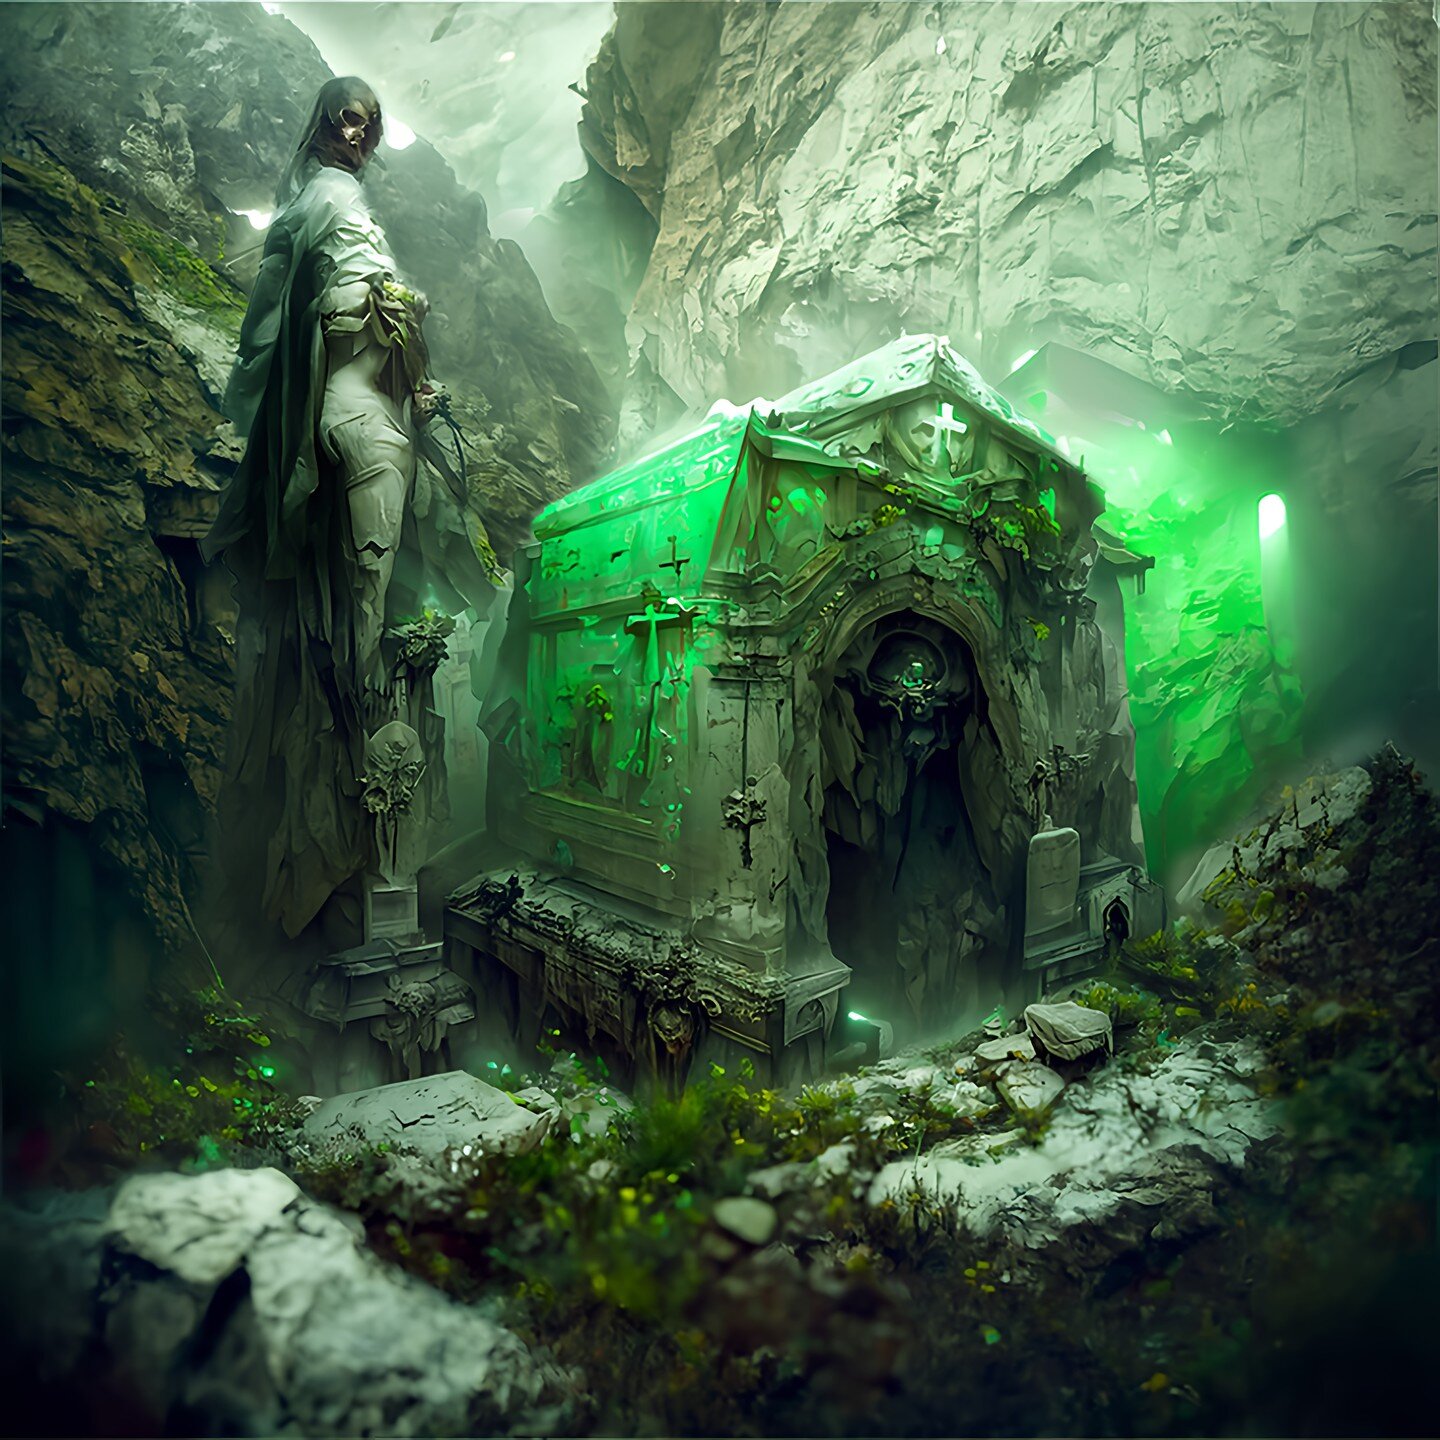 Catacomb of the Lich

Made with #discodiffusion 

#tomb #catacombs #lich #dnd #ruins #grave #ghost #ghosts #mountains #mountainscape #conceptart #abandoned #fantasyart #darkfantasy #darkart #green #surrealism #fineart #modernart #aiart #gothic #myart